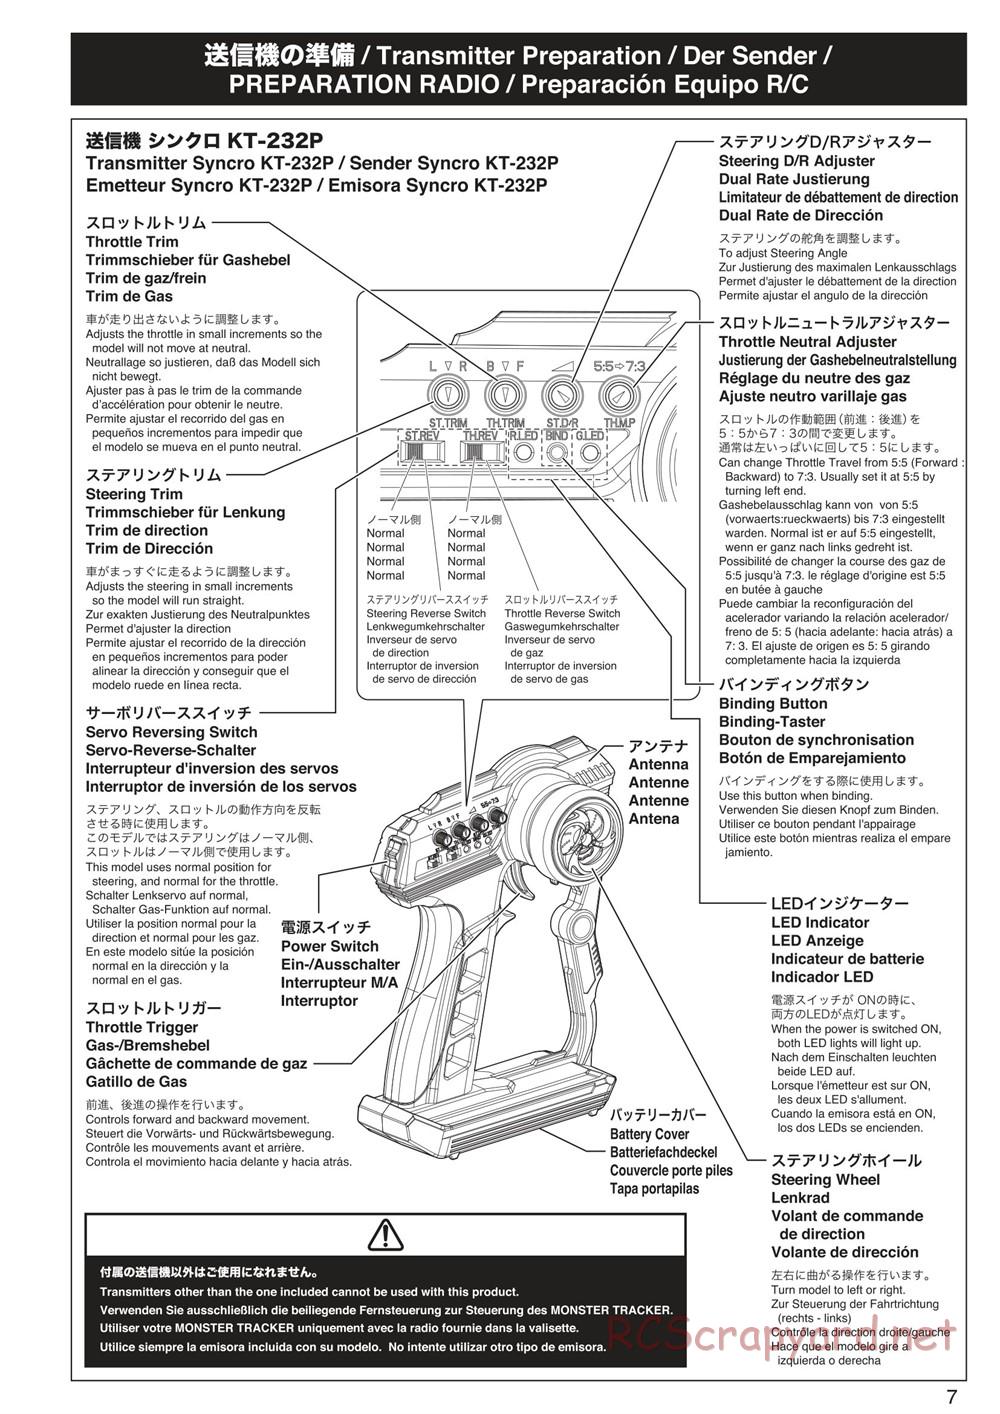 Kyosho - Monster Tracker EP - Manual - Page 7